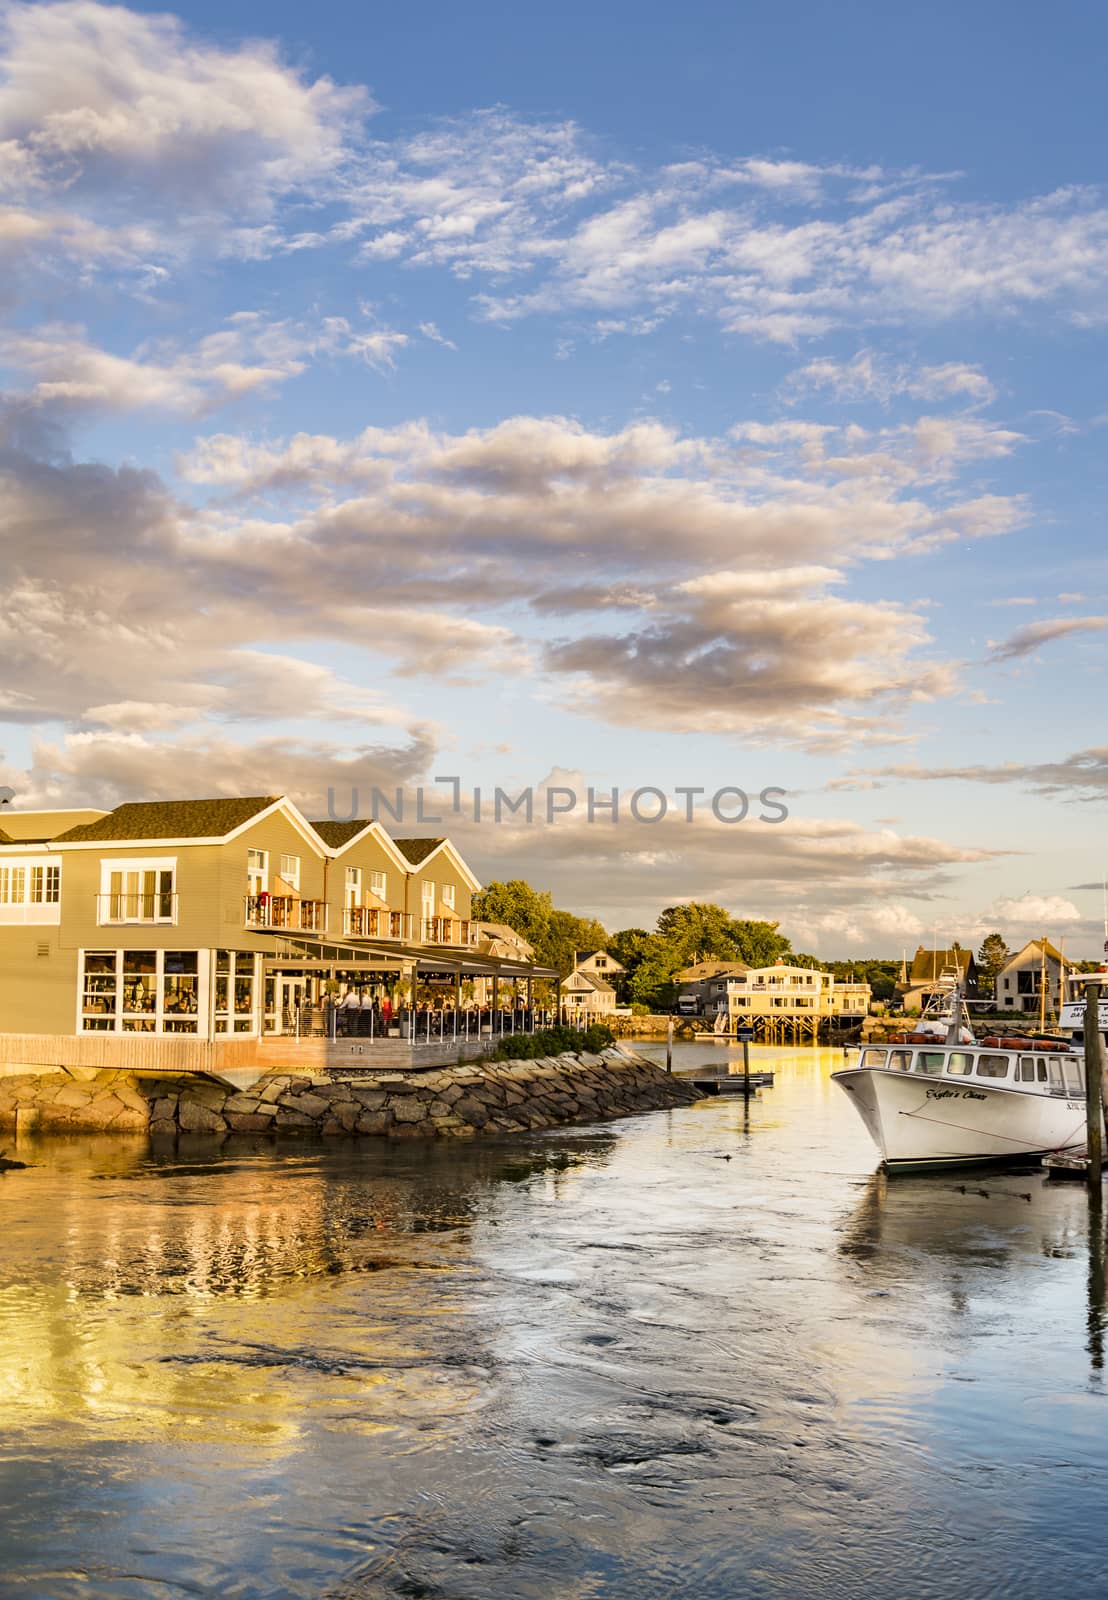 KENNEBUNKPORT - AUGUST 8: Nice view of the small harbour on August 8, 2015 in Kennebunkport, Maine, USA